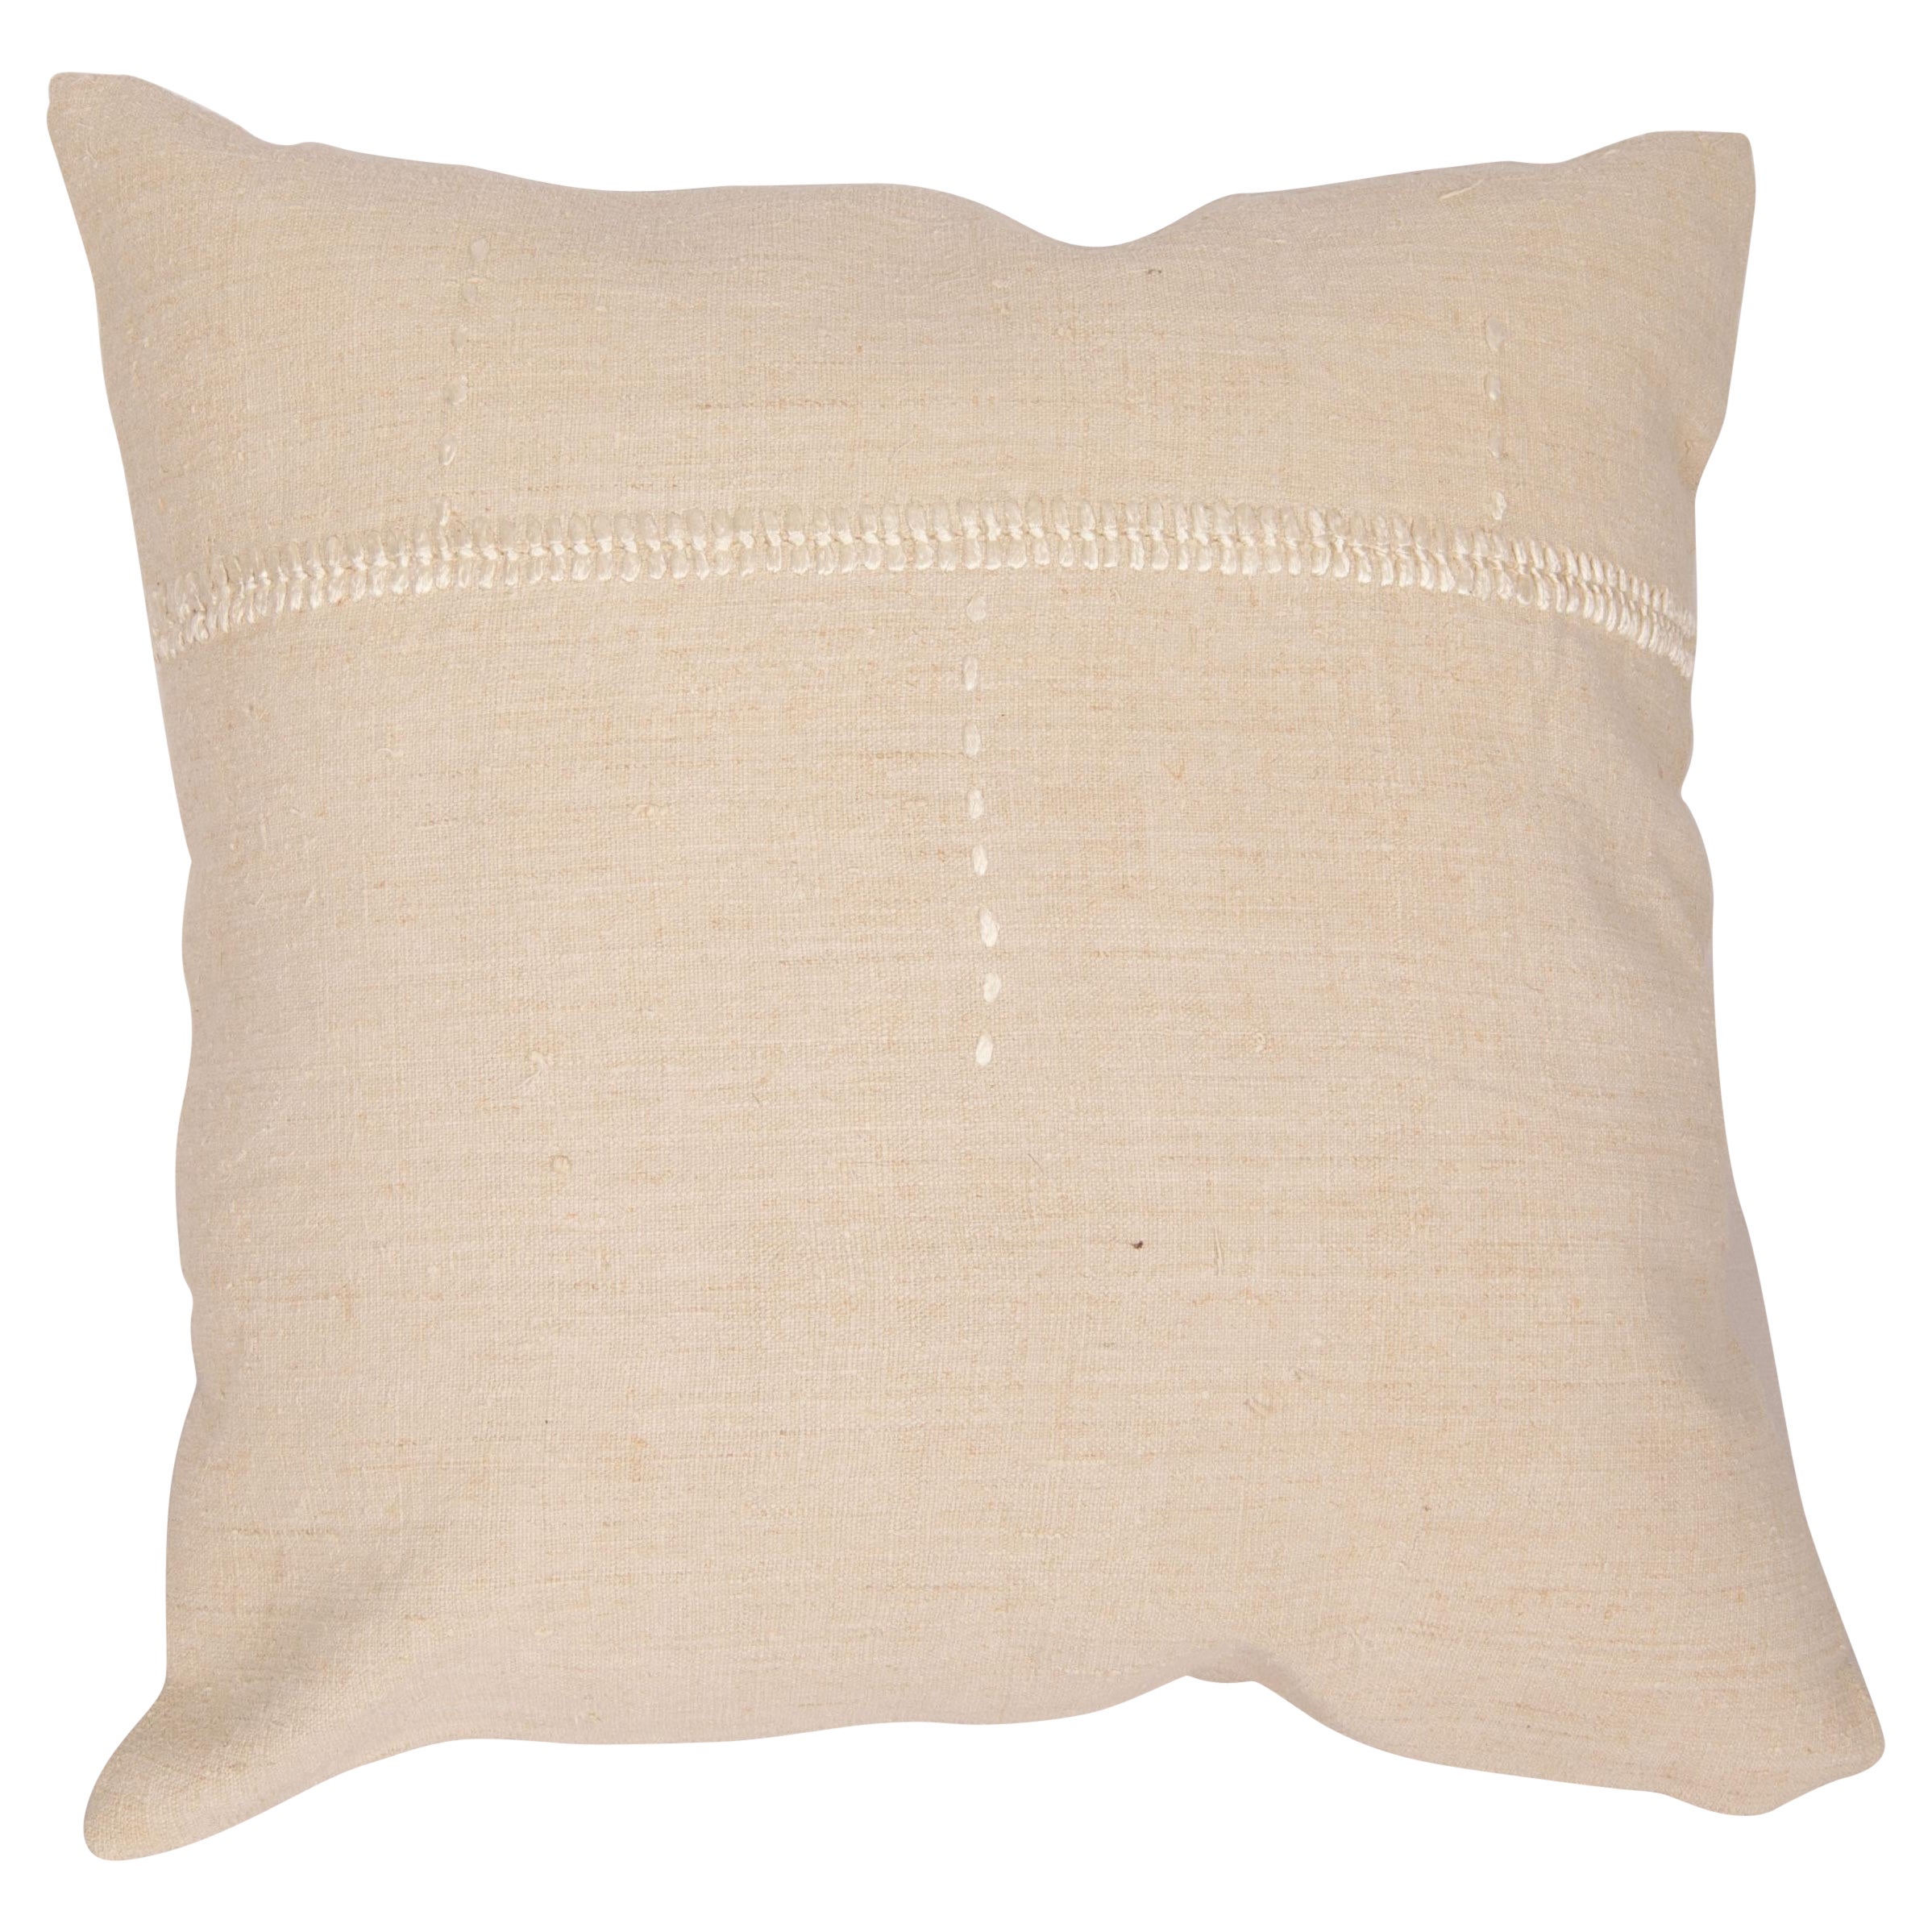 Pillow Case Made from Rustic Anatolian Vintage Linen Textile